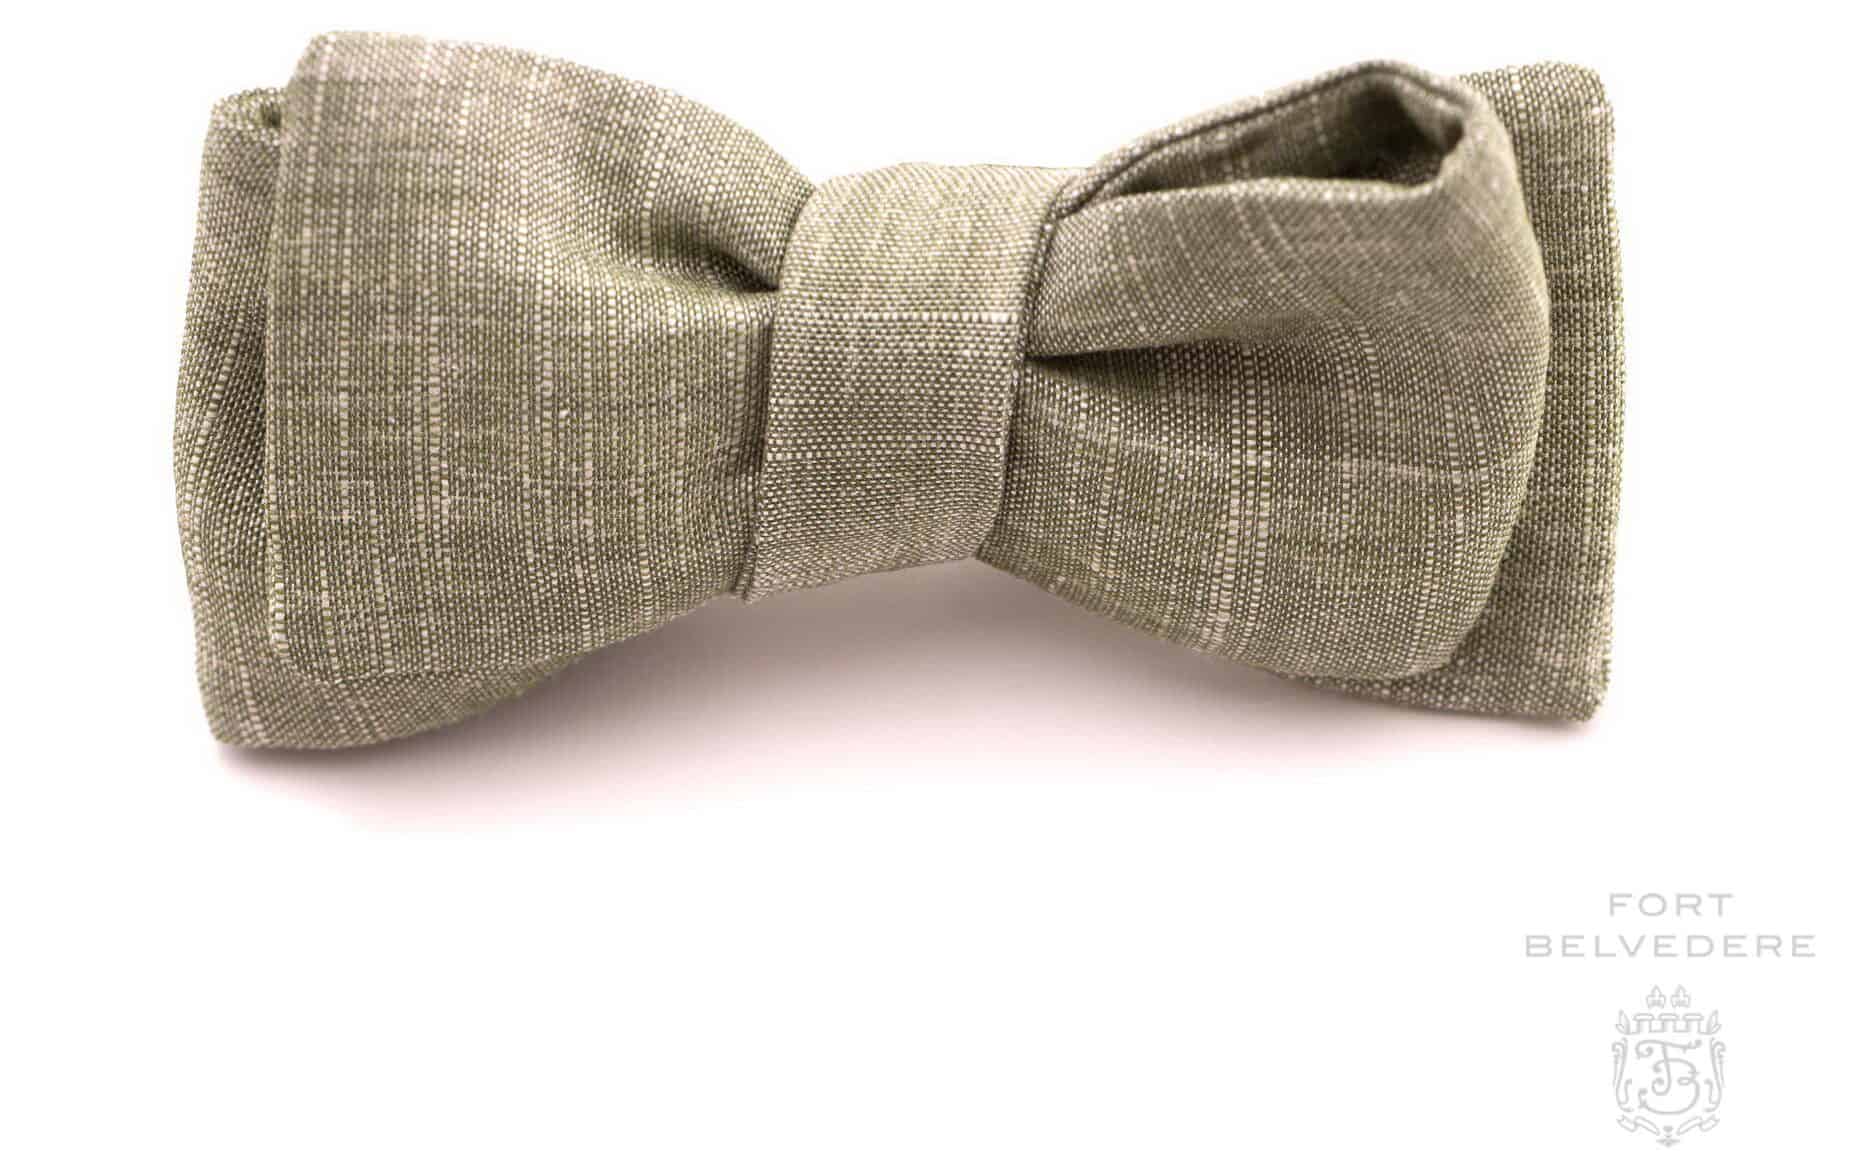 Black and Green self tie Handmade cotton bow tie adjustable up to 20 inches Red 